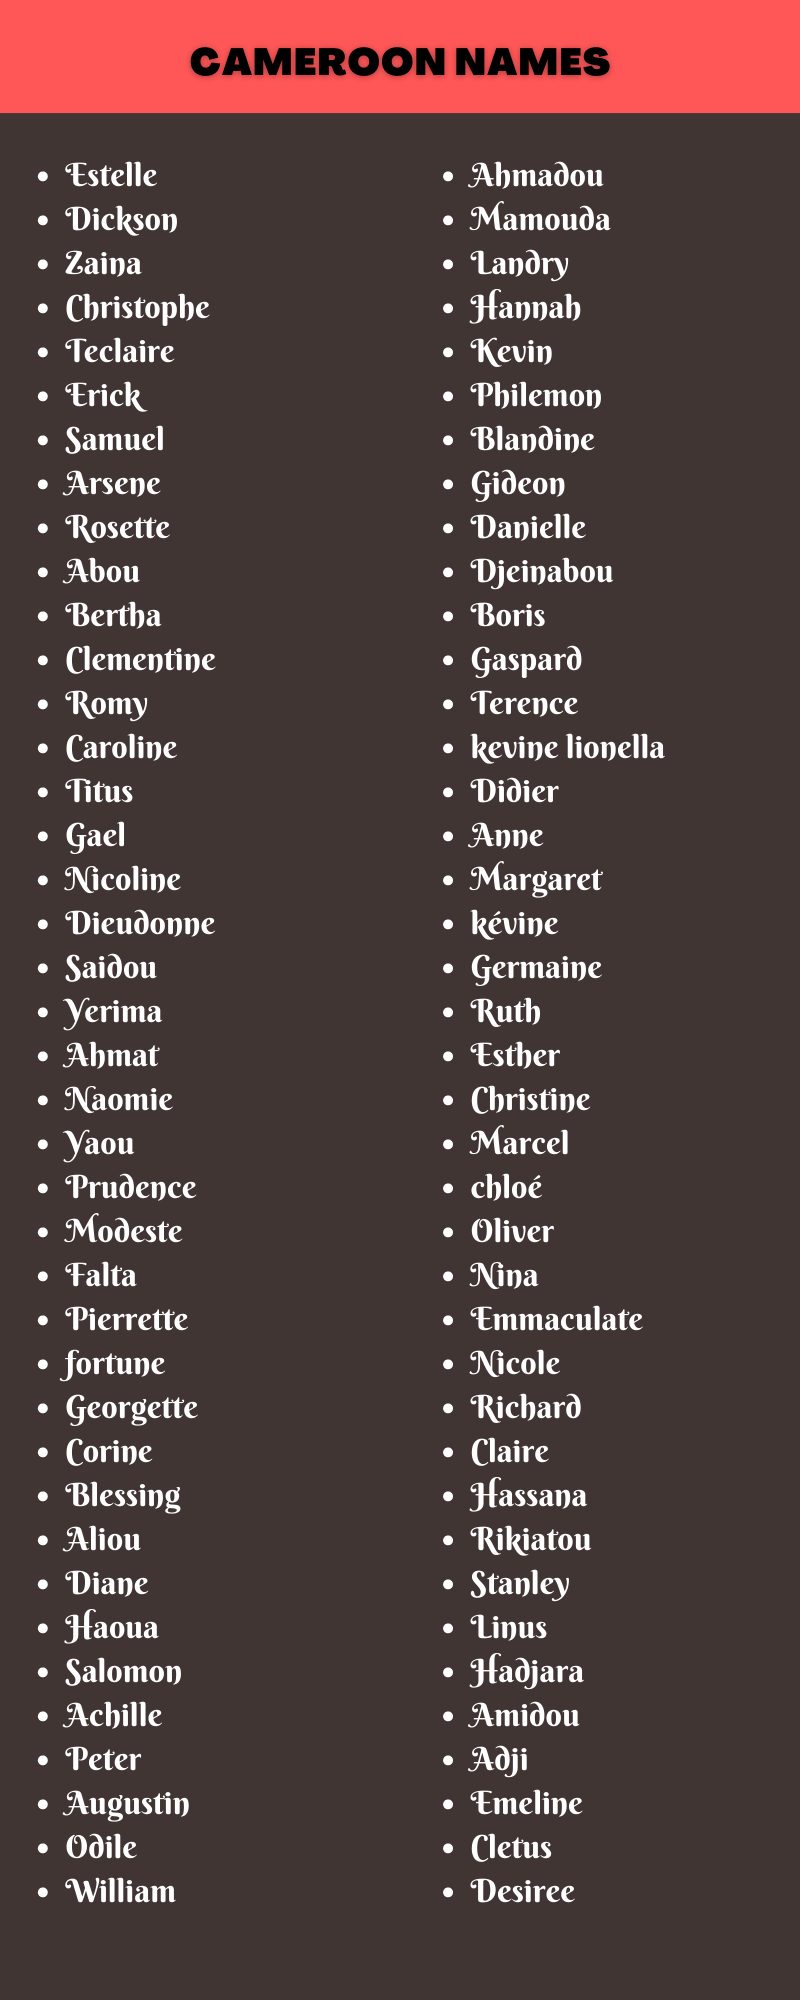 Cameroon Names